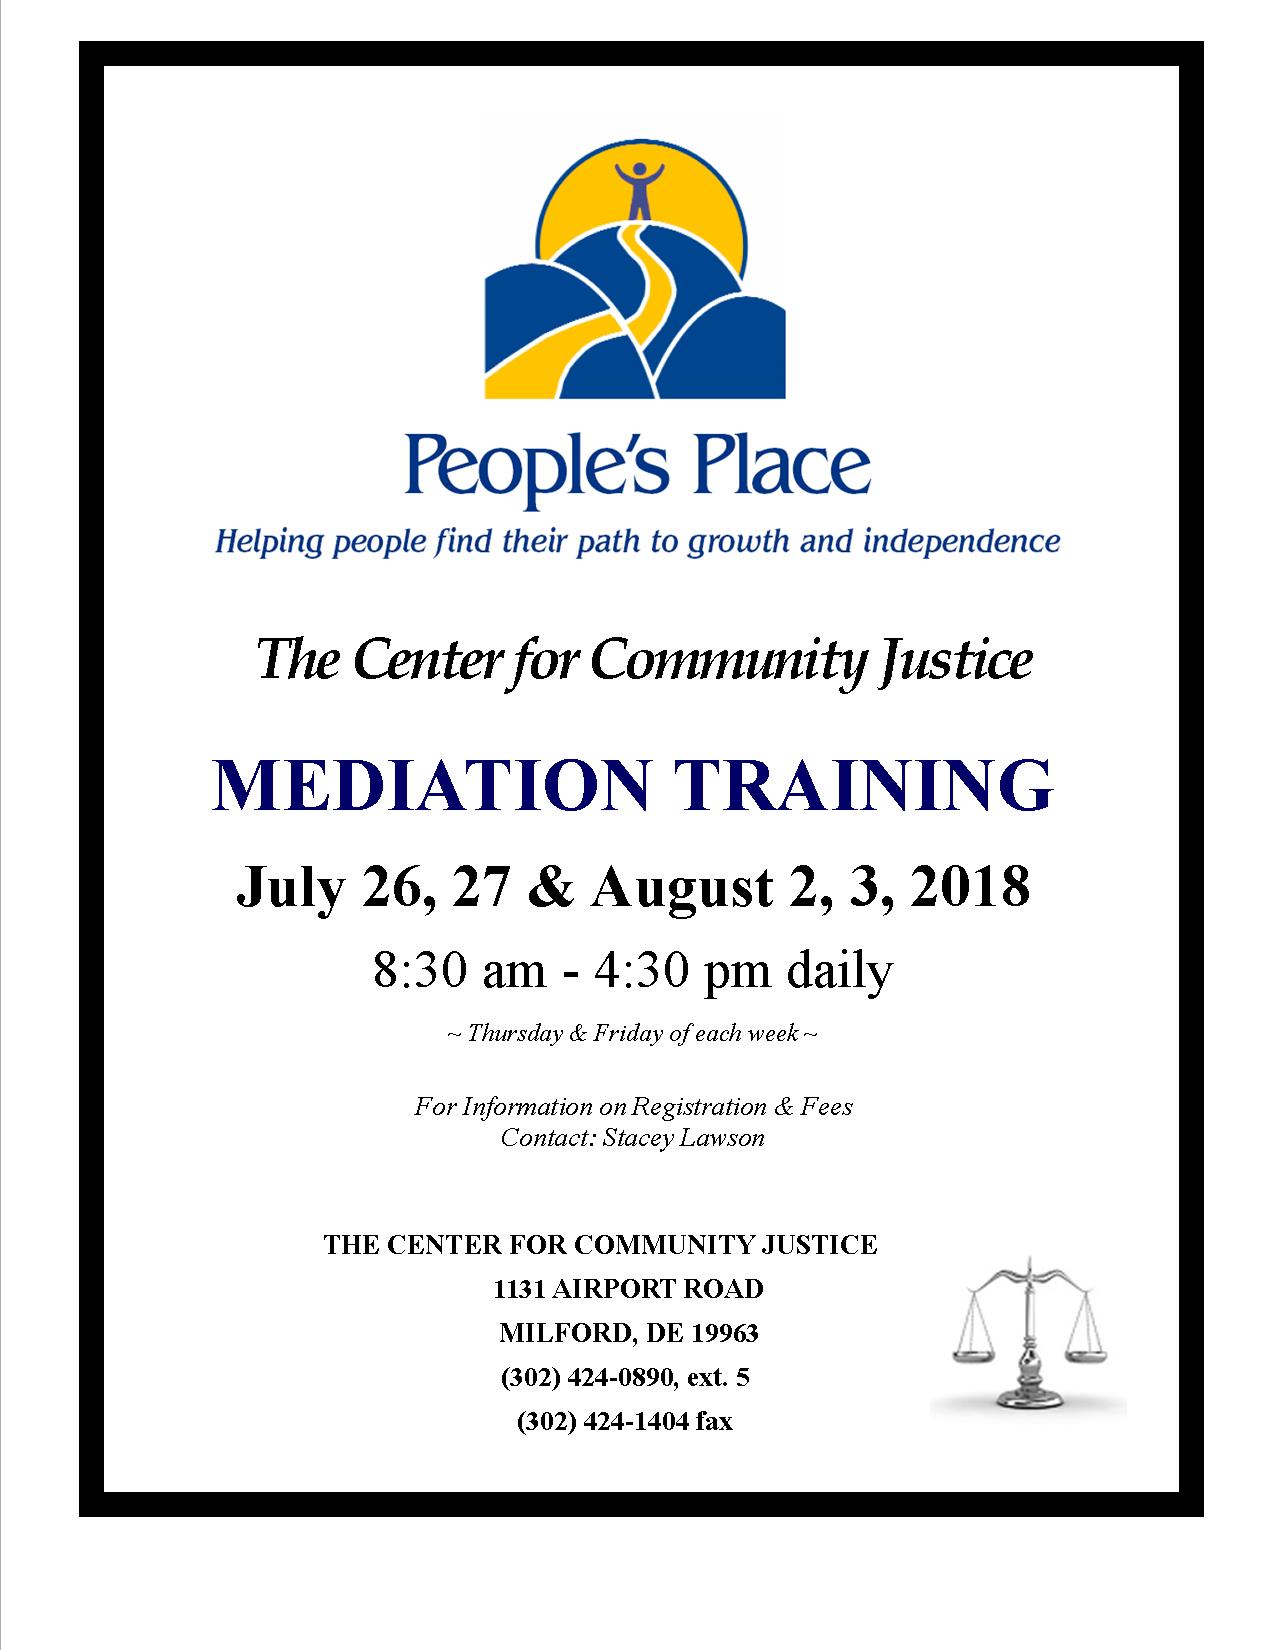 People's Place Mediation Training